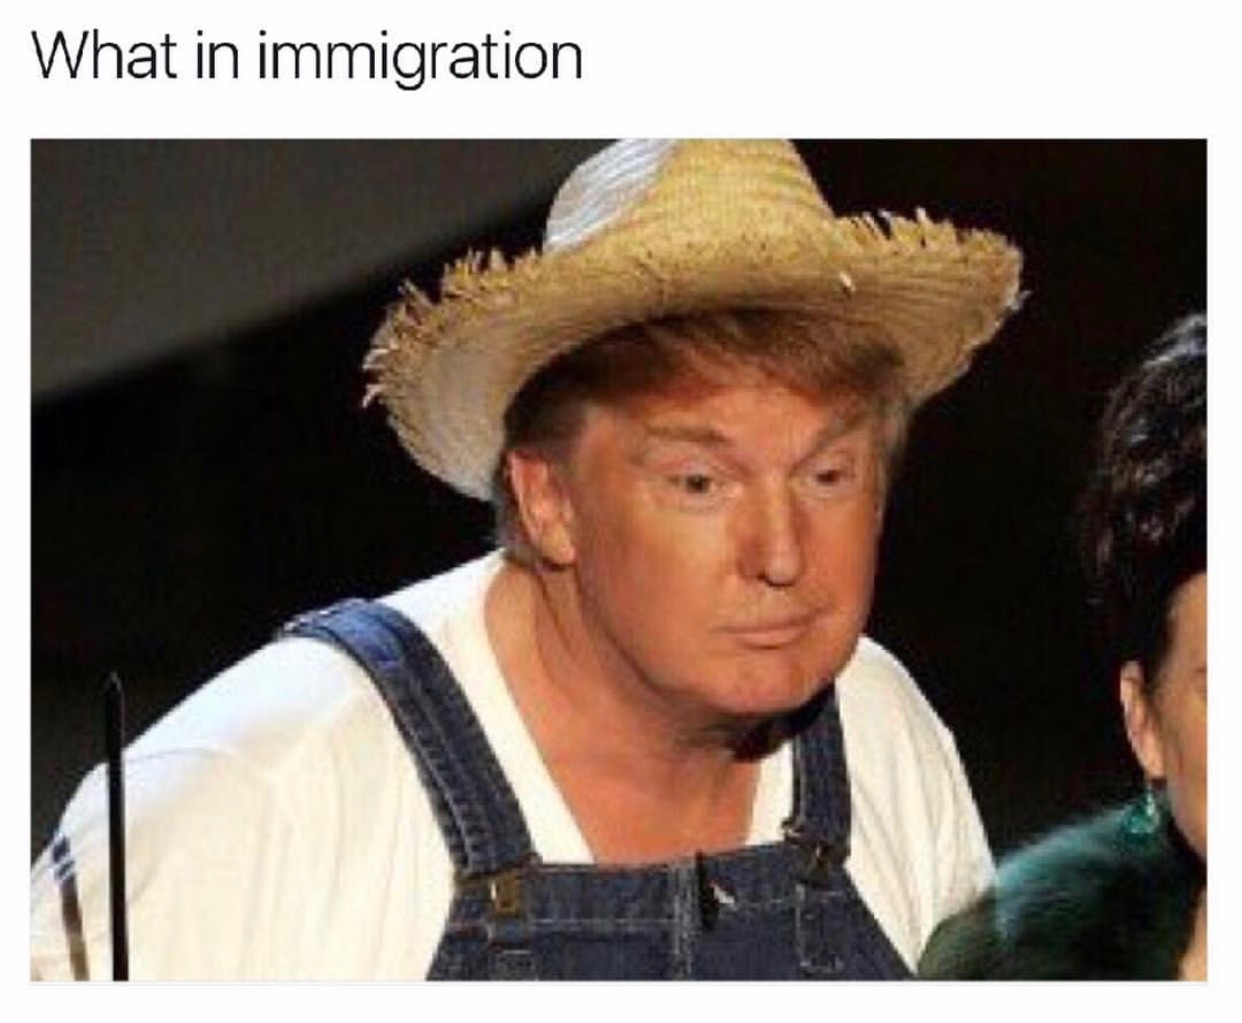 trump as farmer - What in immigration